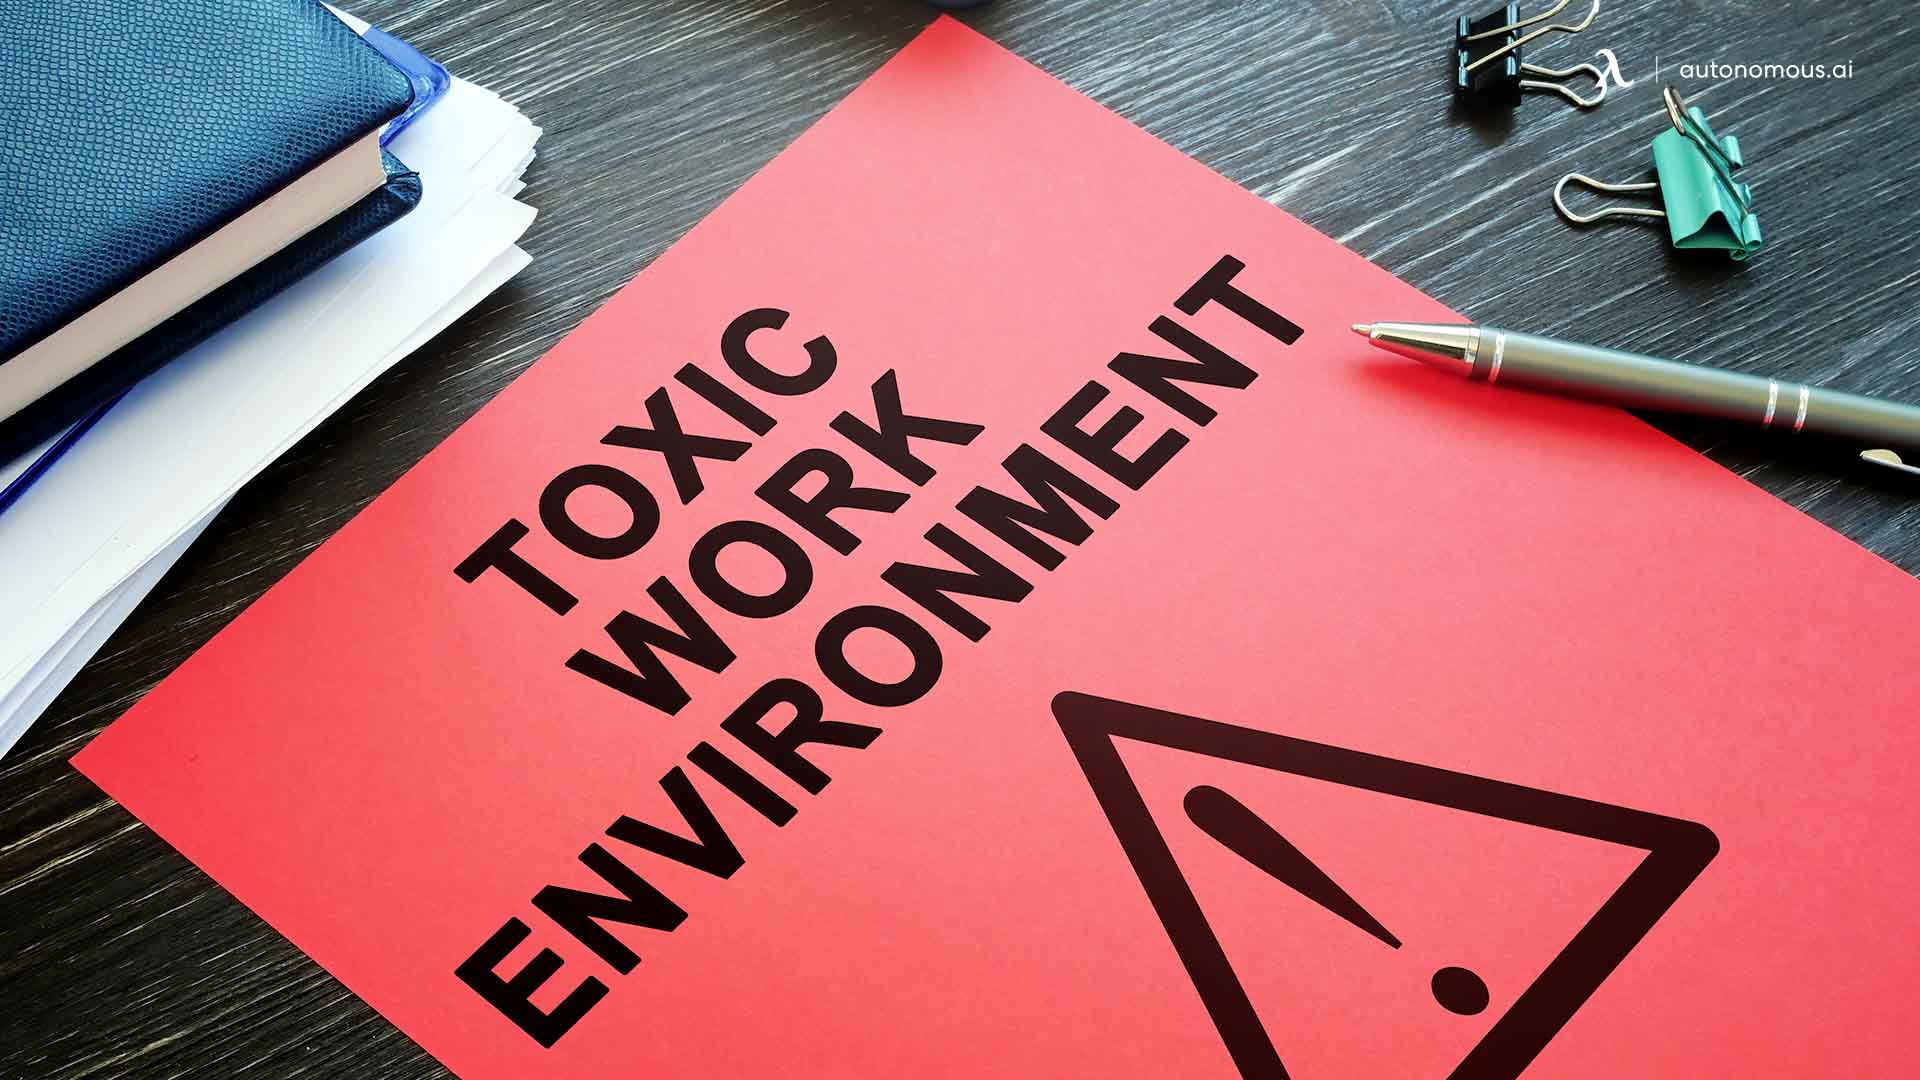 How to Improve a Toxic Work Environment